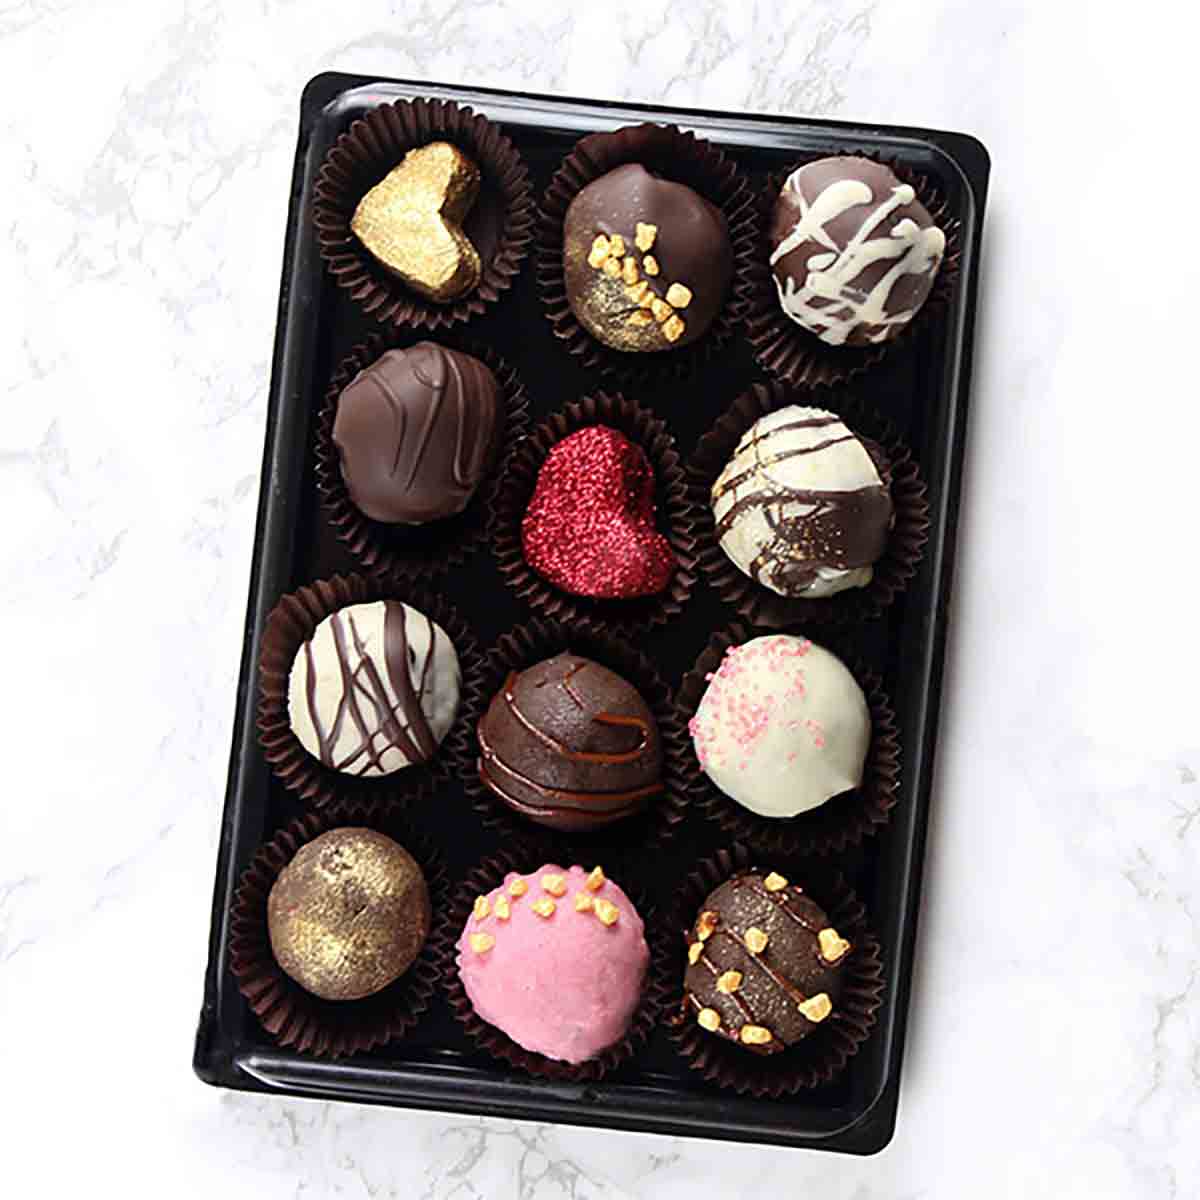 Chocolate vegan valentines day candy in a box